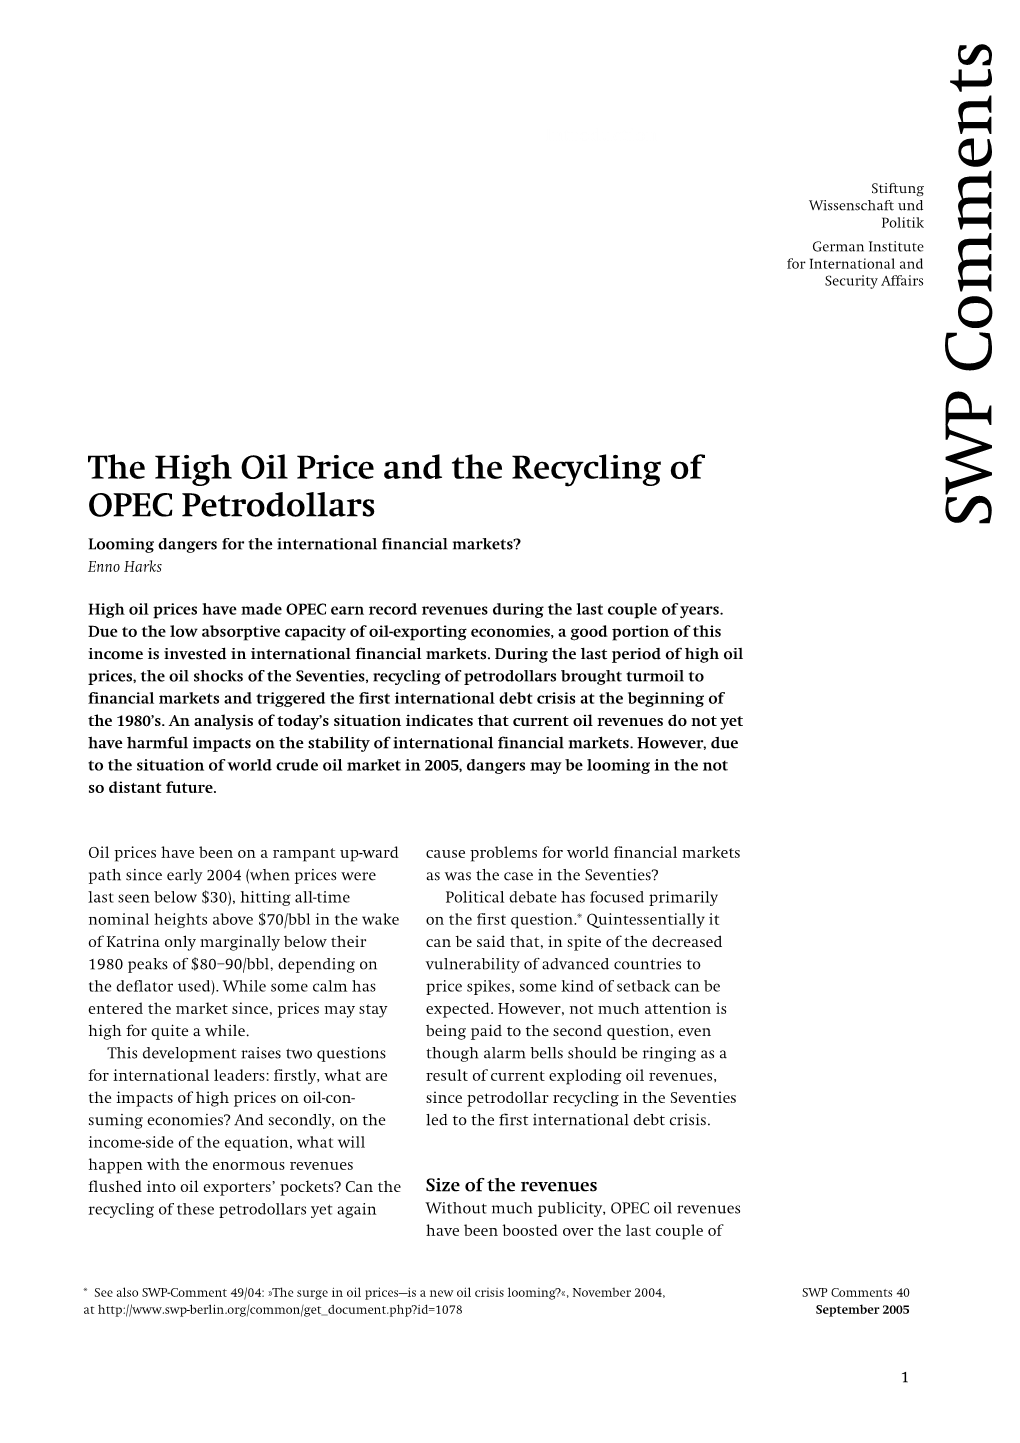 The High Oil Price and the Recycling of OPEC Petrodollars SWP Comments Looming Dangers for the International Financial Markets? Enno Harks